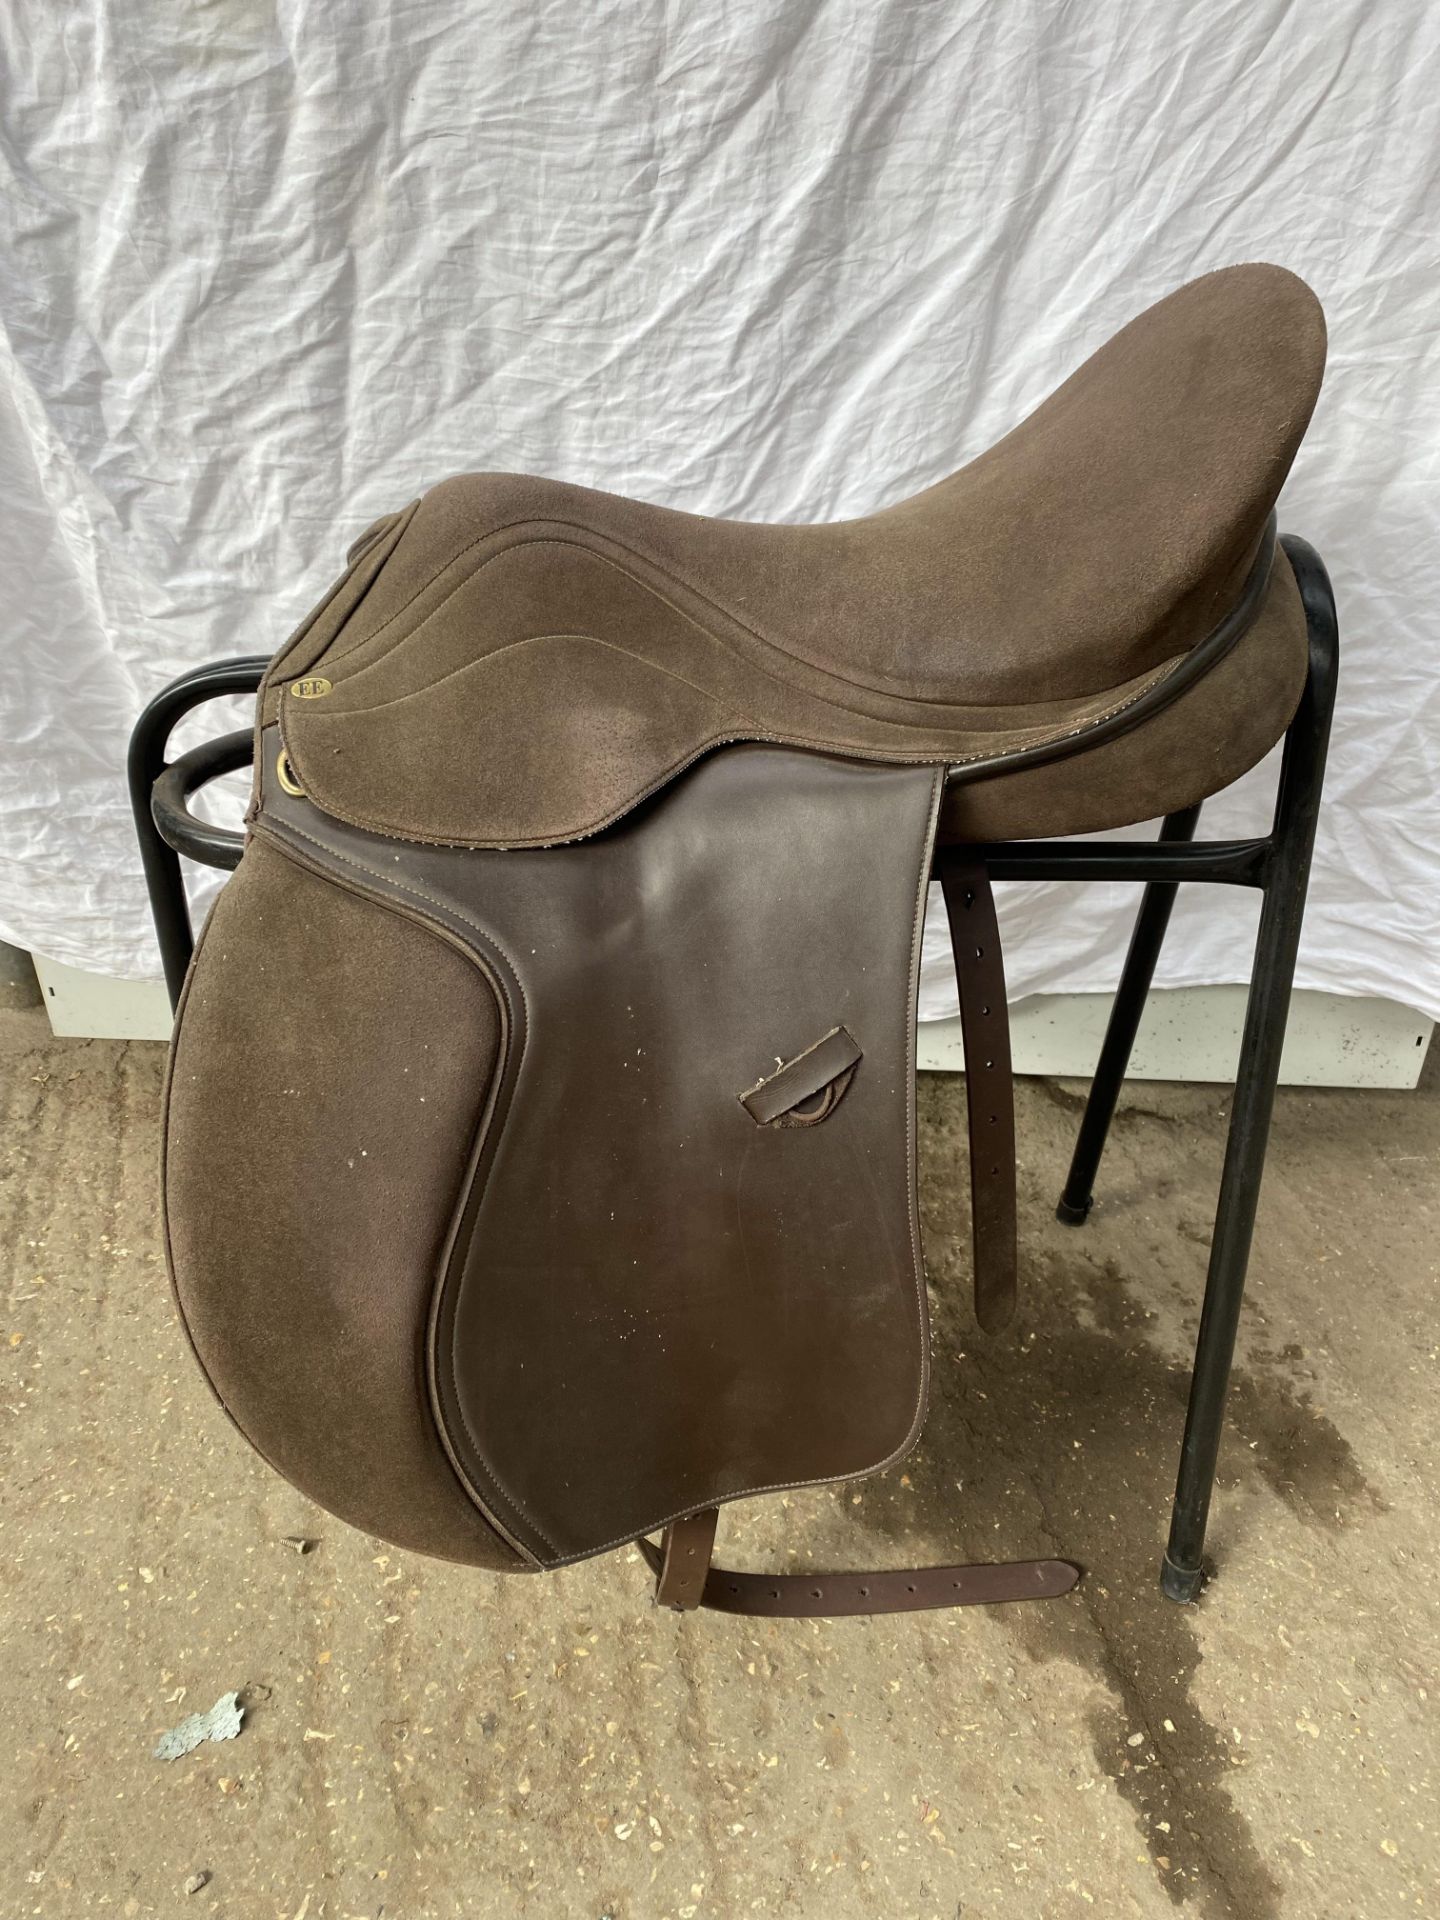 Enlightened Equestrian synthetic 17" saddle